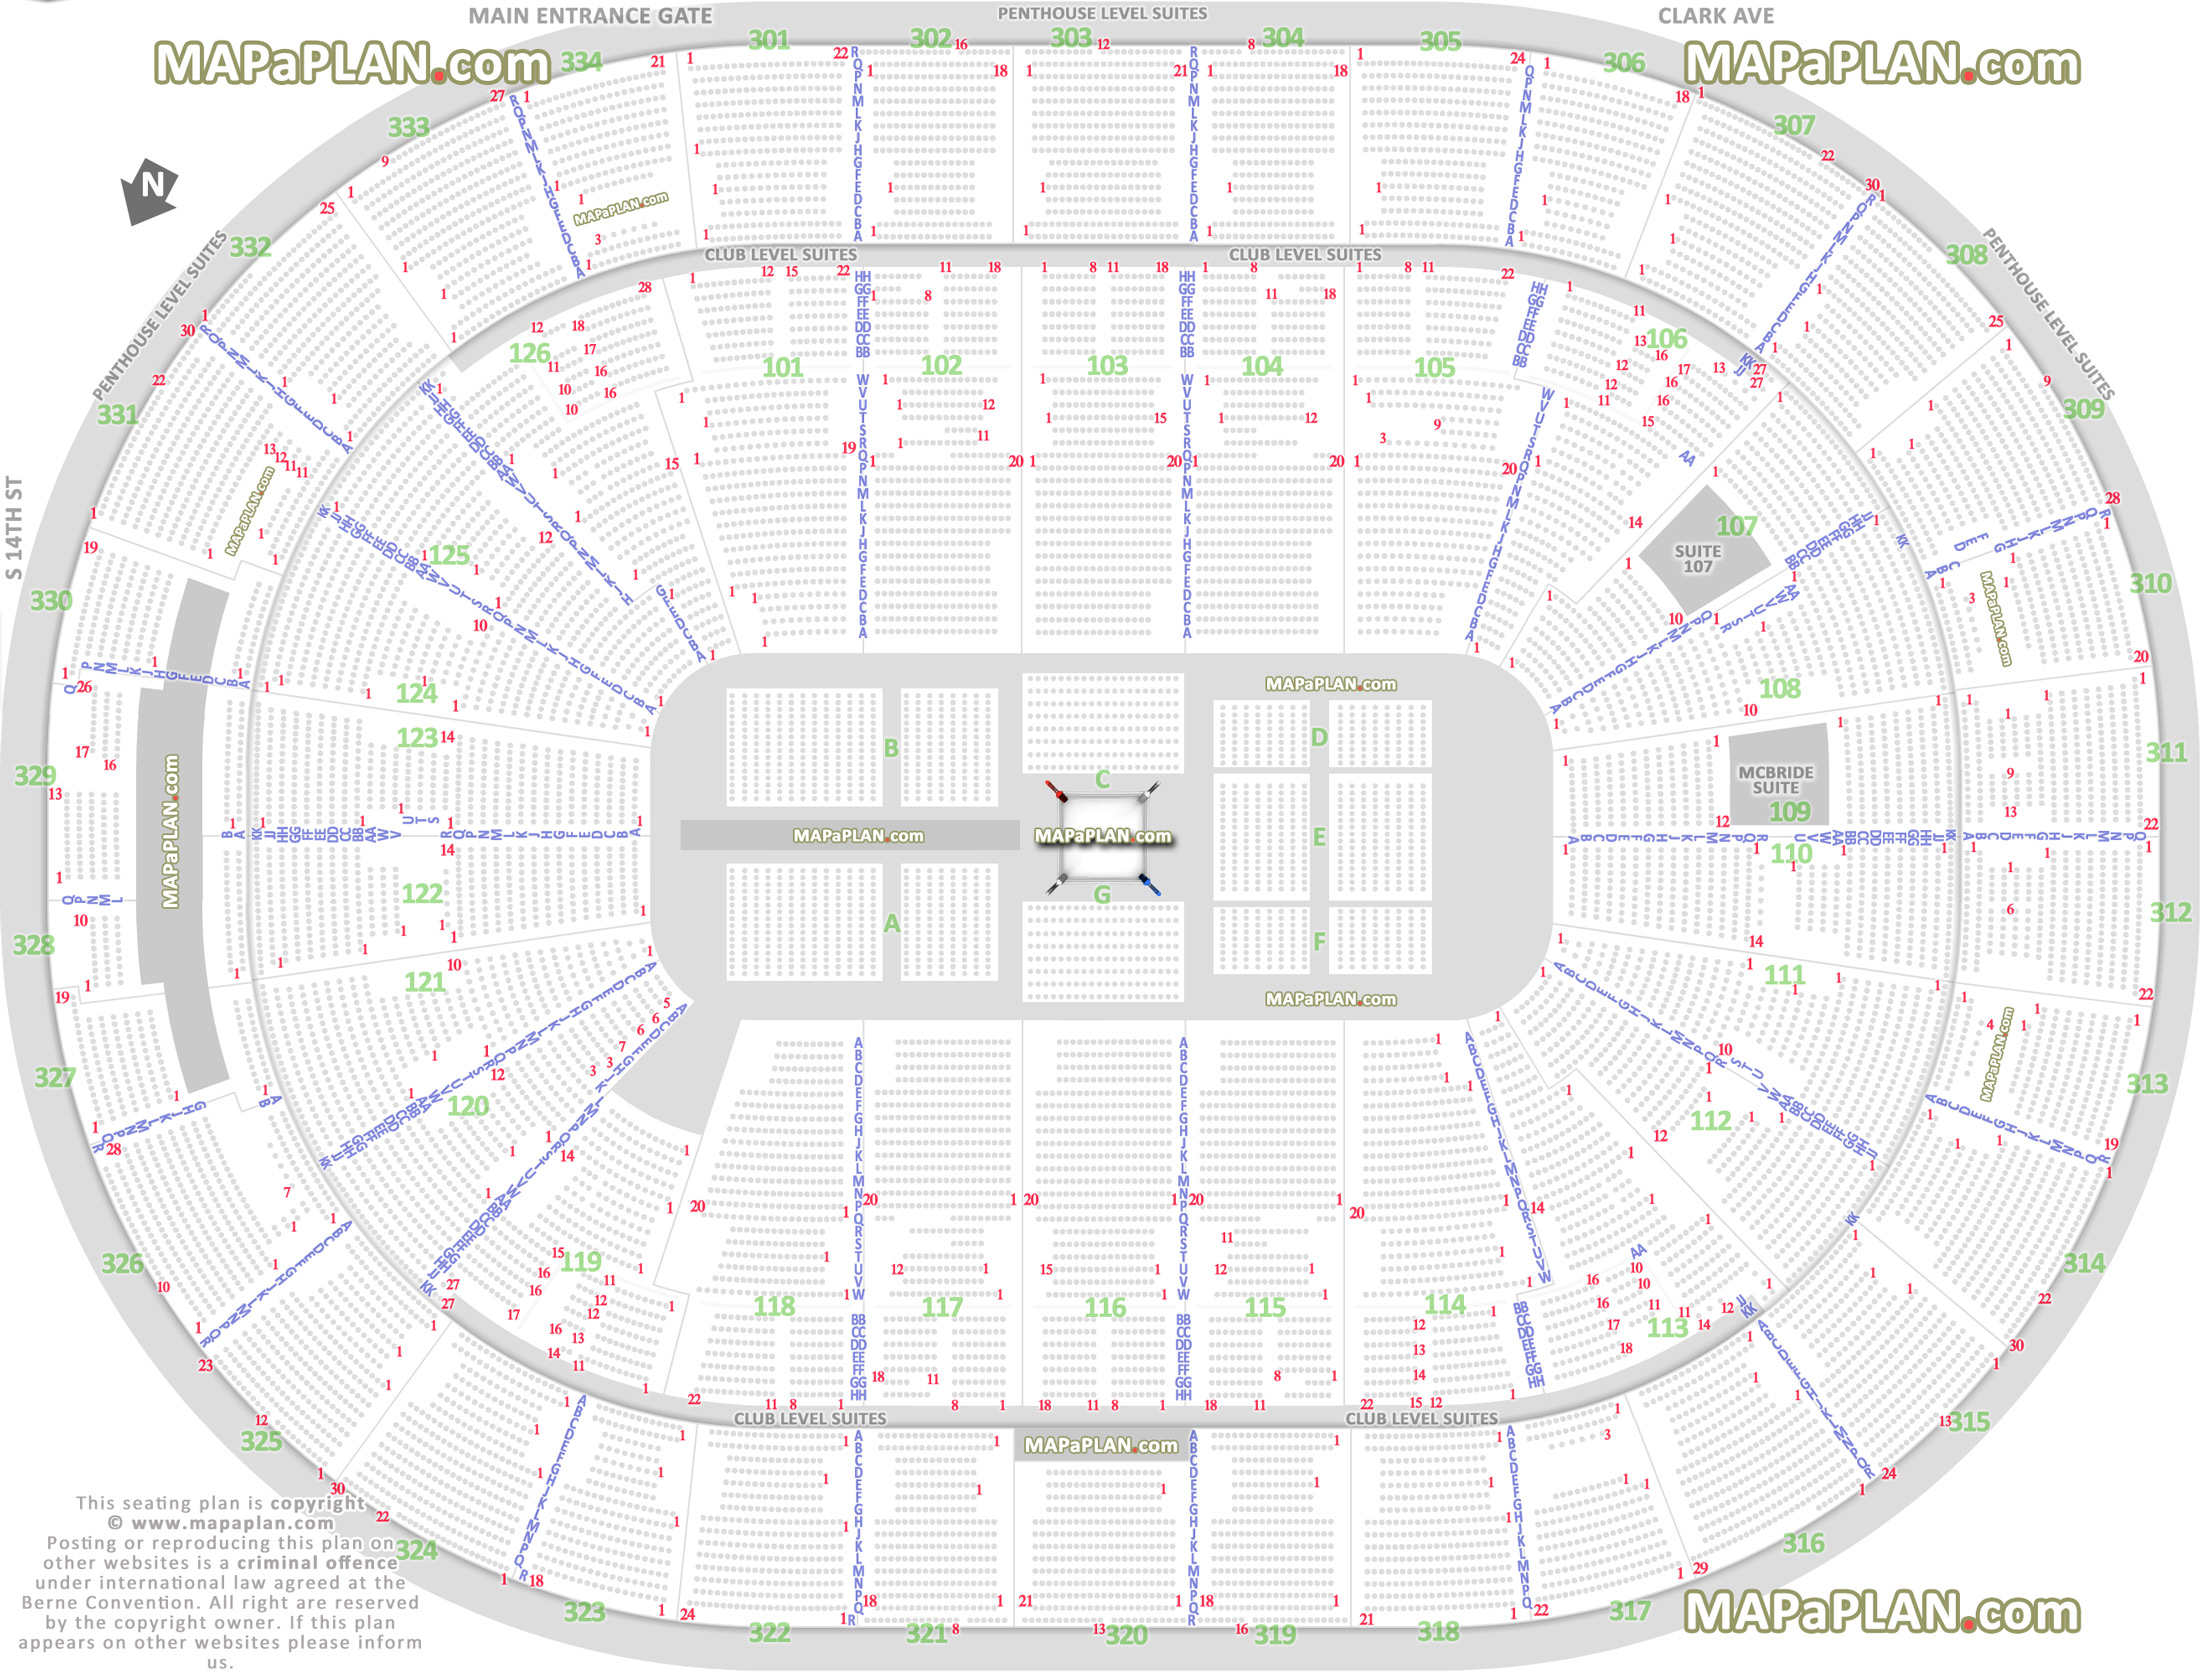 wwe raw smackdown live wrestling boxing match events 360 round ring configuration good bad worst seats executive hospitality rental suites level St. Louis Scottrade Center seating chart